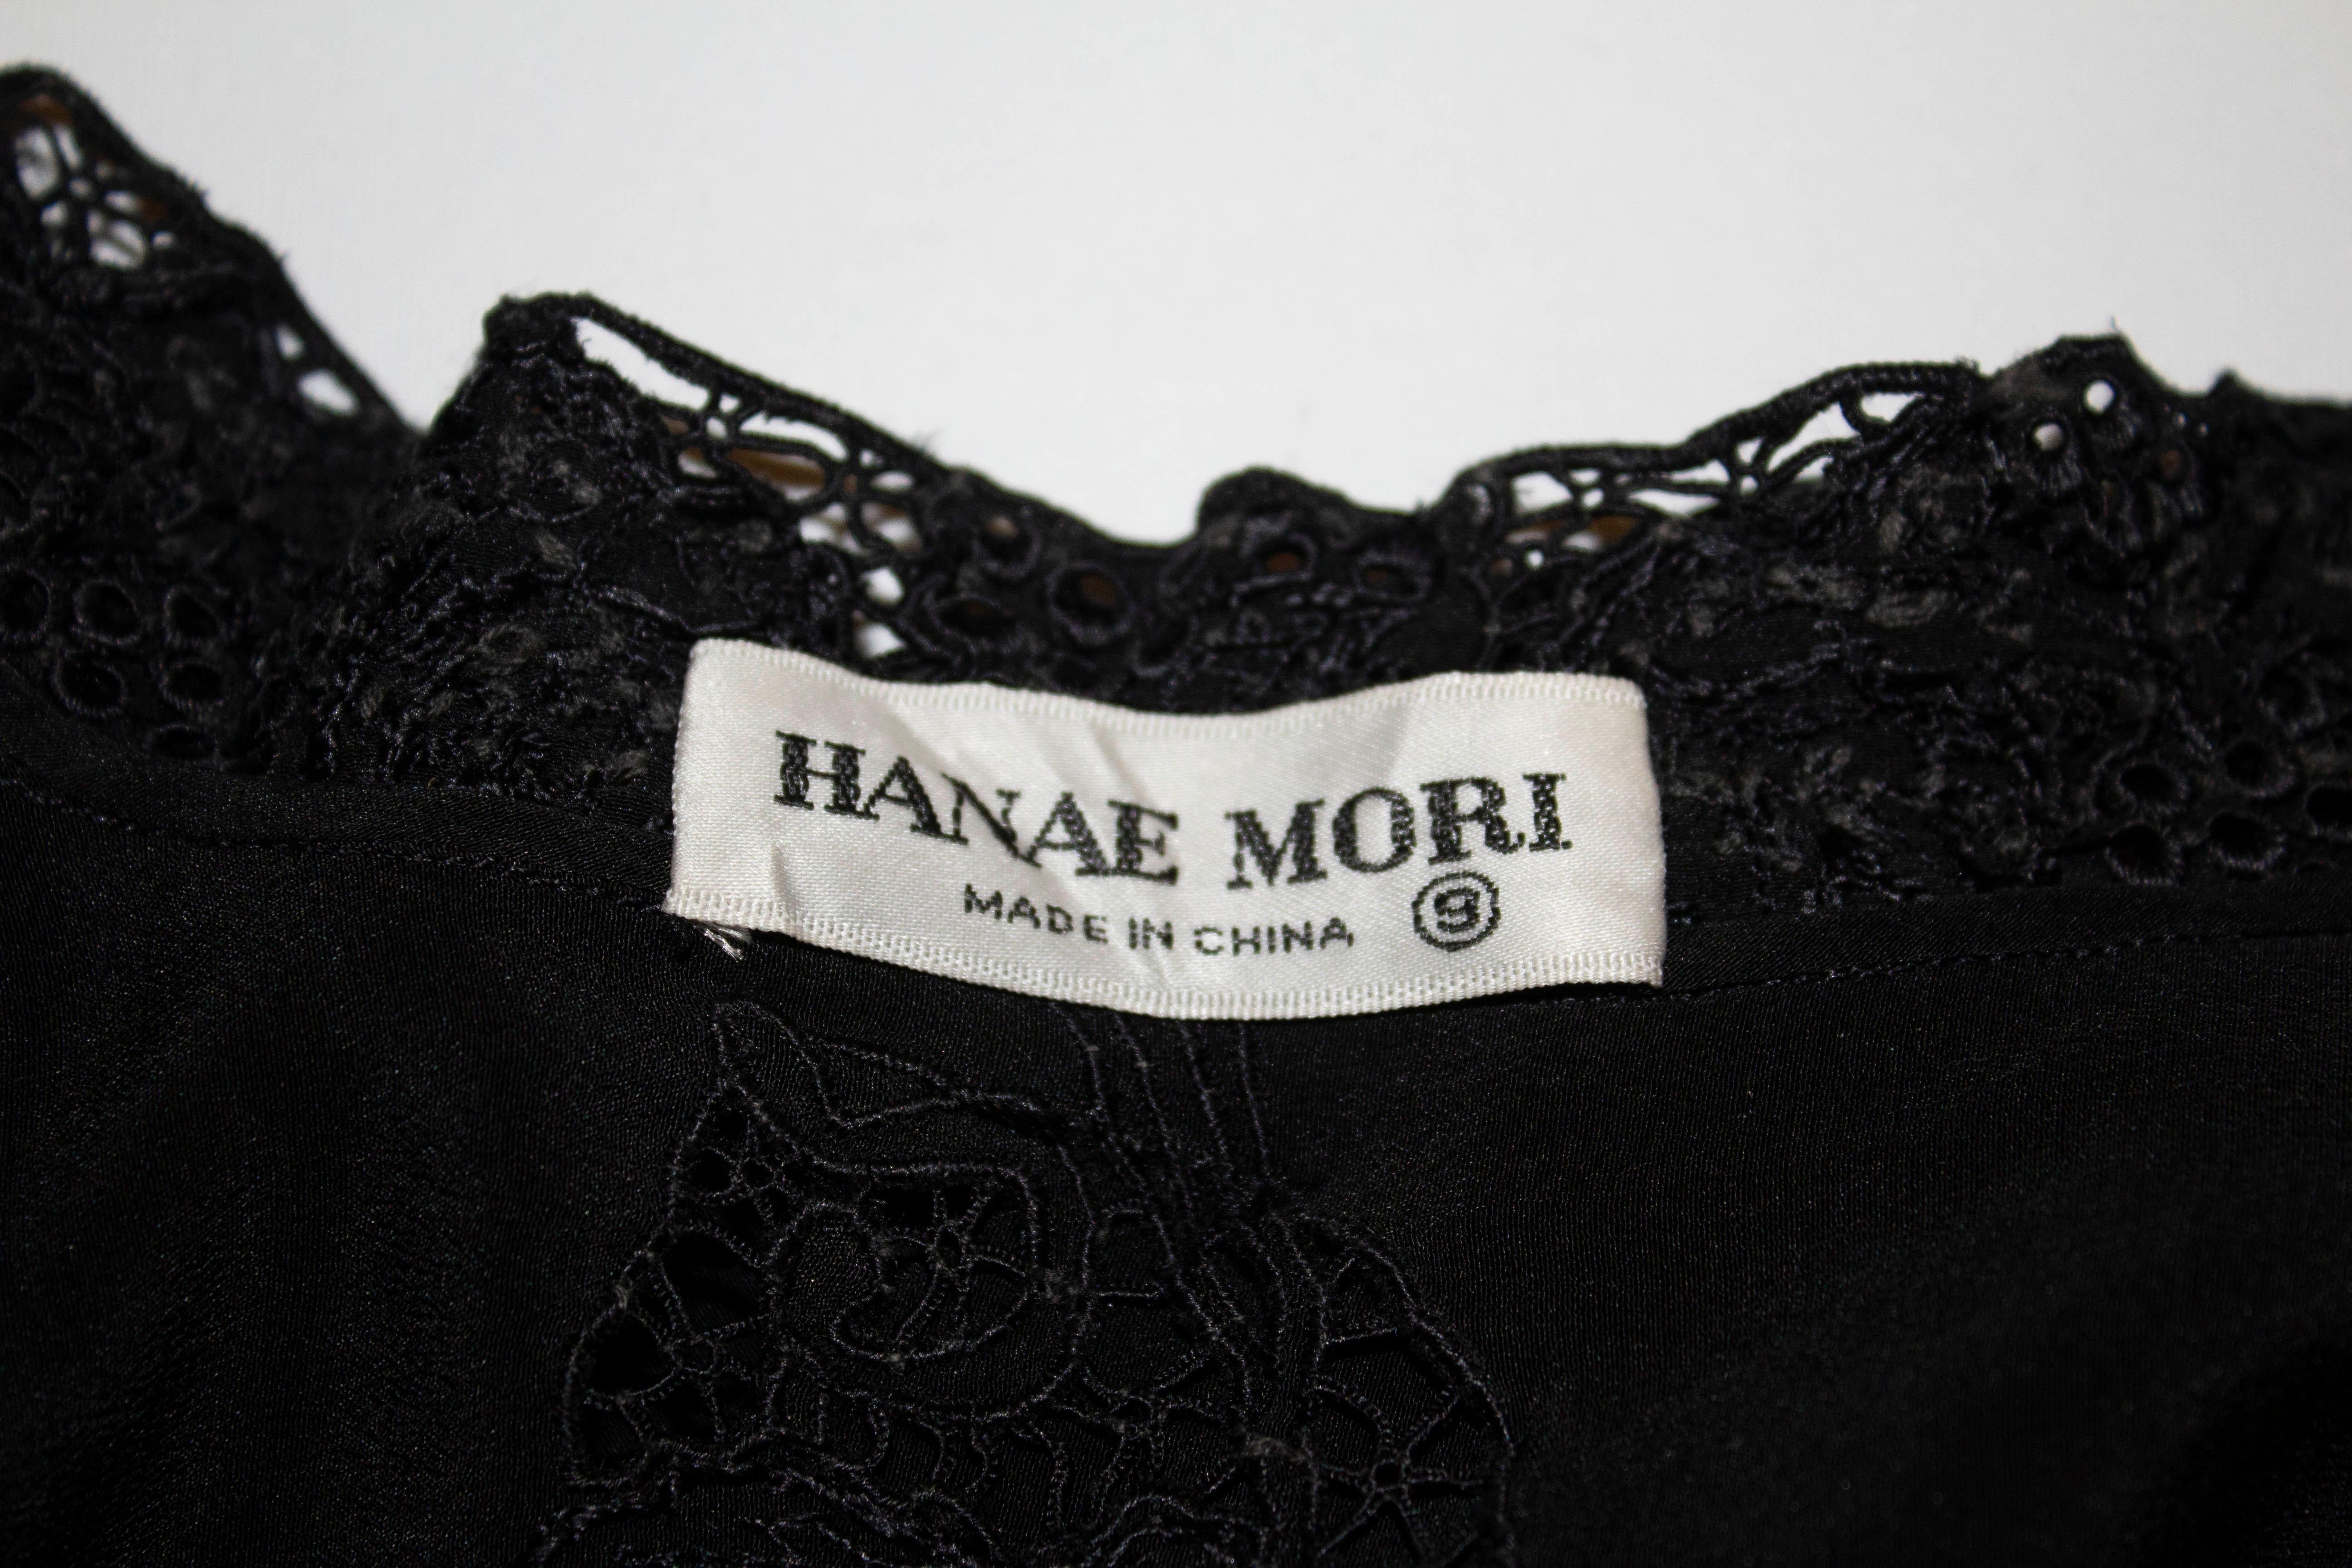 A chic vintage black silk blouse with lace detail by Hanae Mori. The blouse has  stand up collar with lace front and cuff detail. It has popper cuffs and silk covered buttons.
Measurements : Bust 35'', length 24''